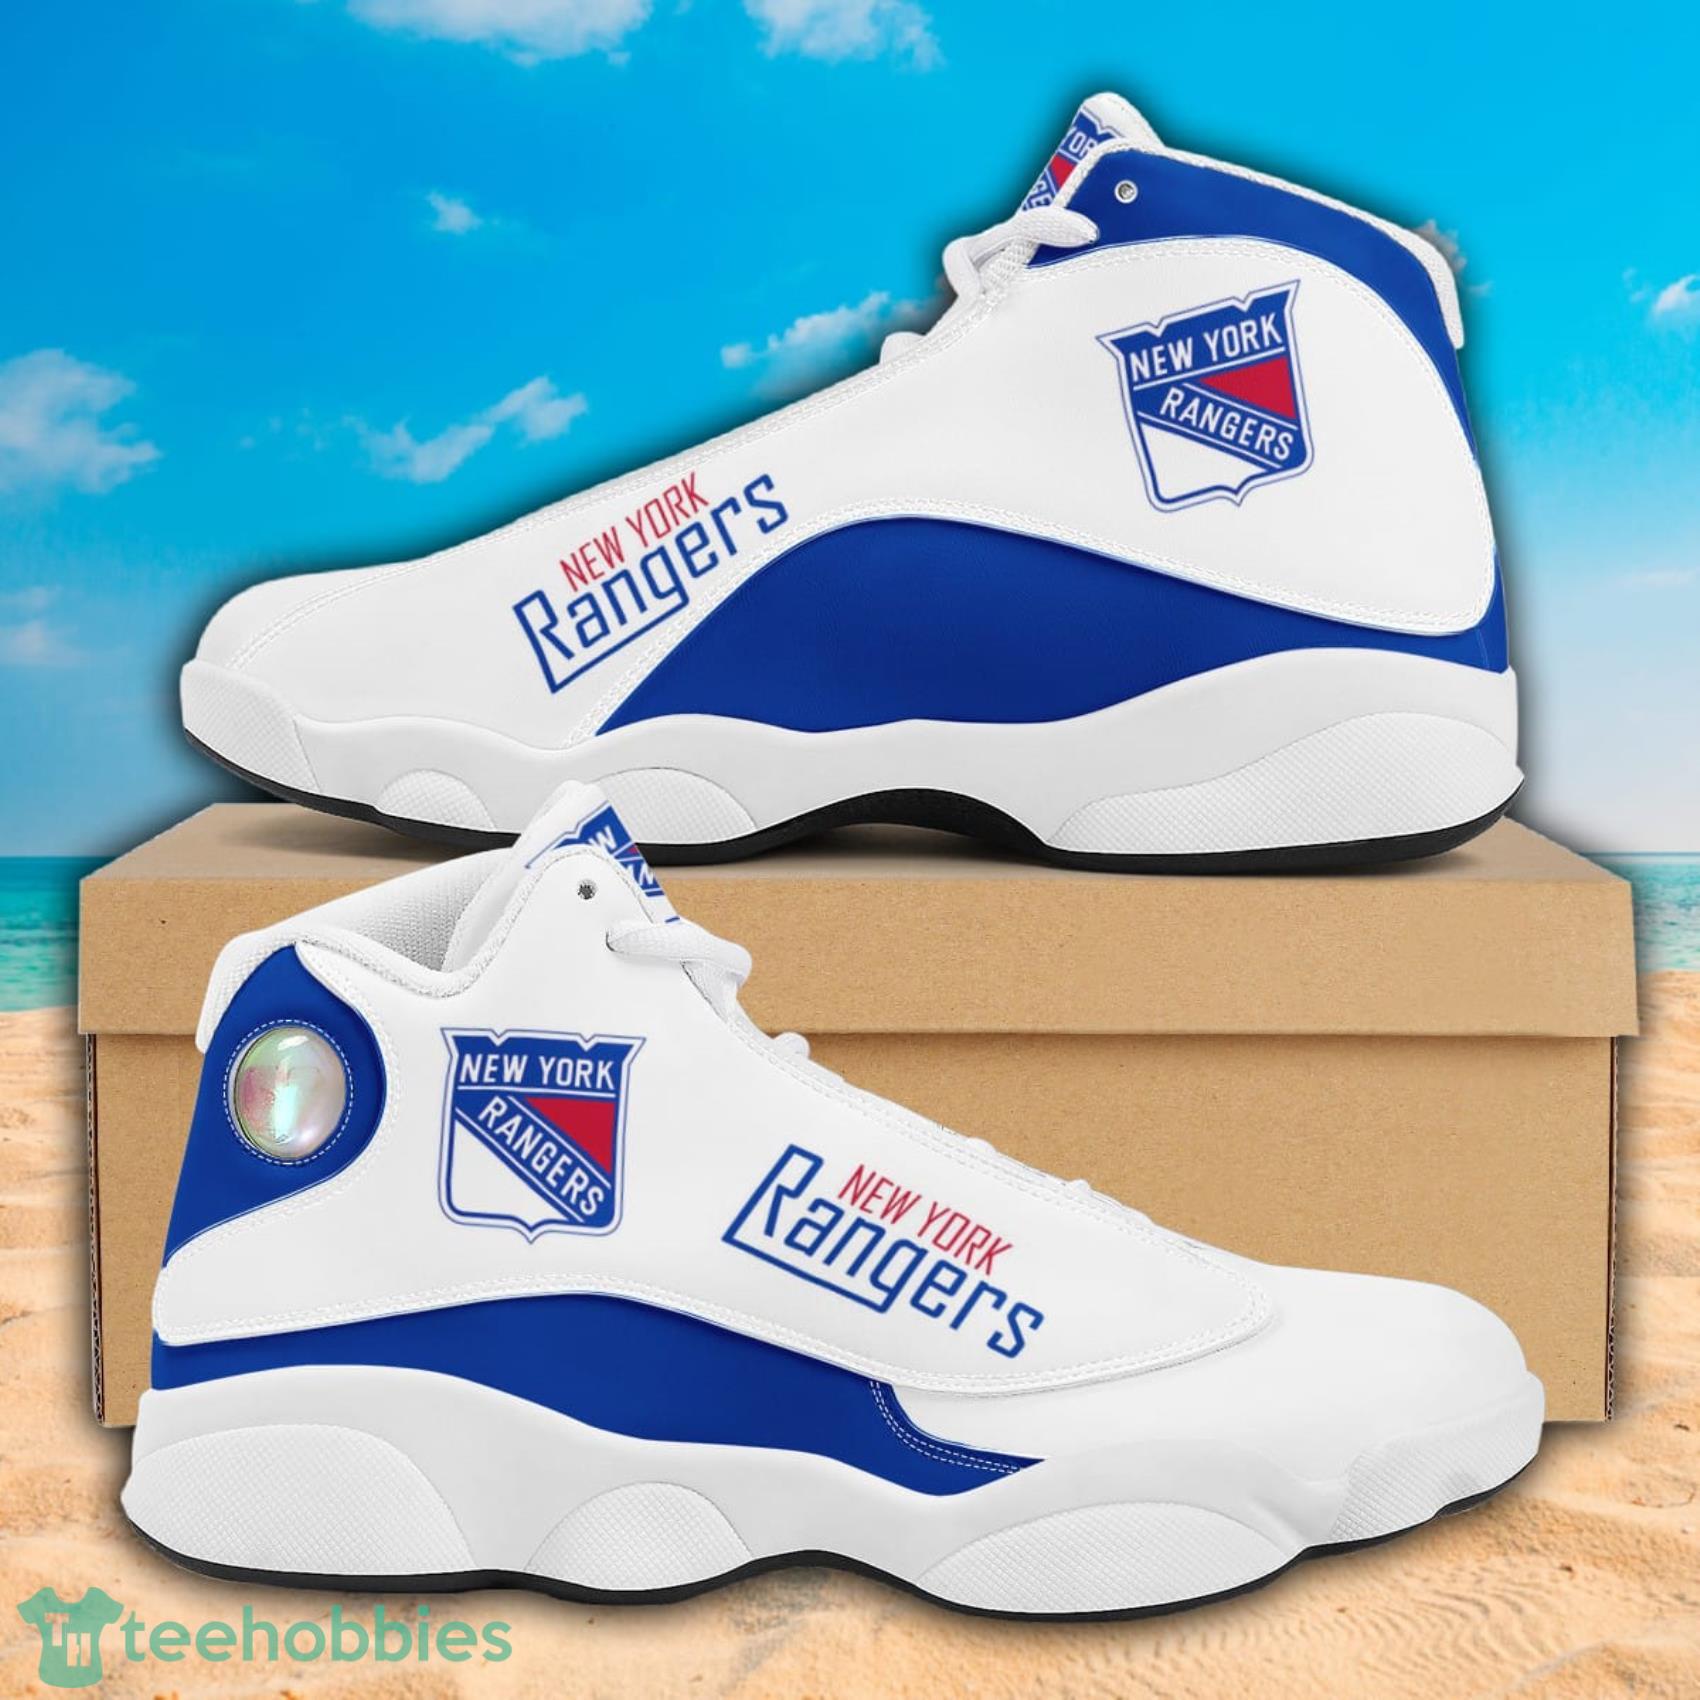 New York Rangers Shoes NHL Air Jordan 4 - Ingenious Gifts Your Whole Family